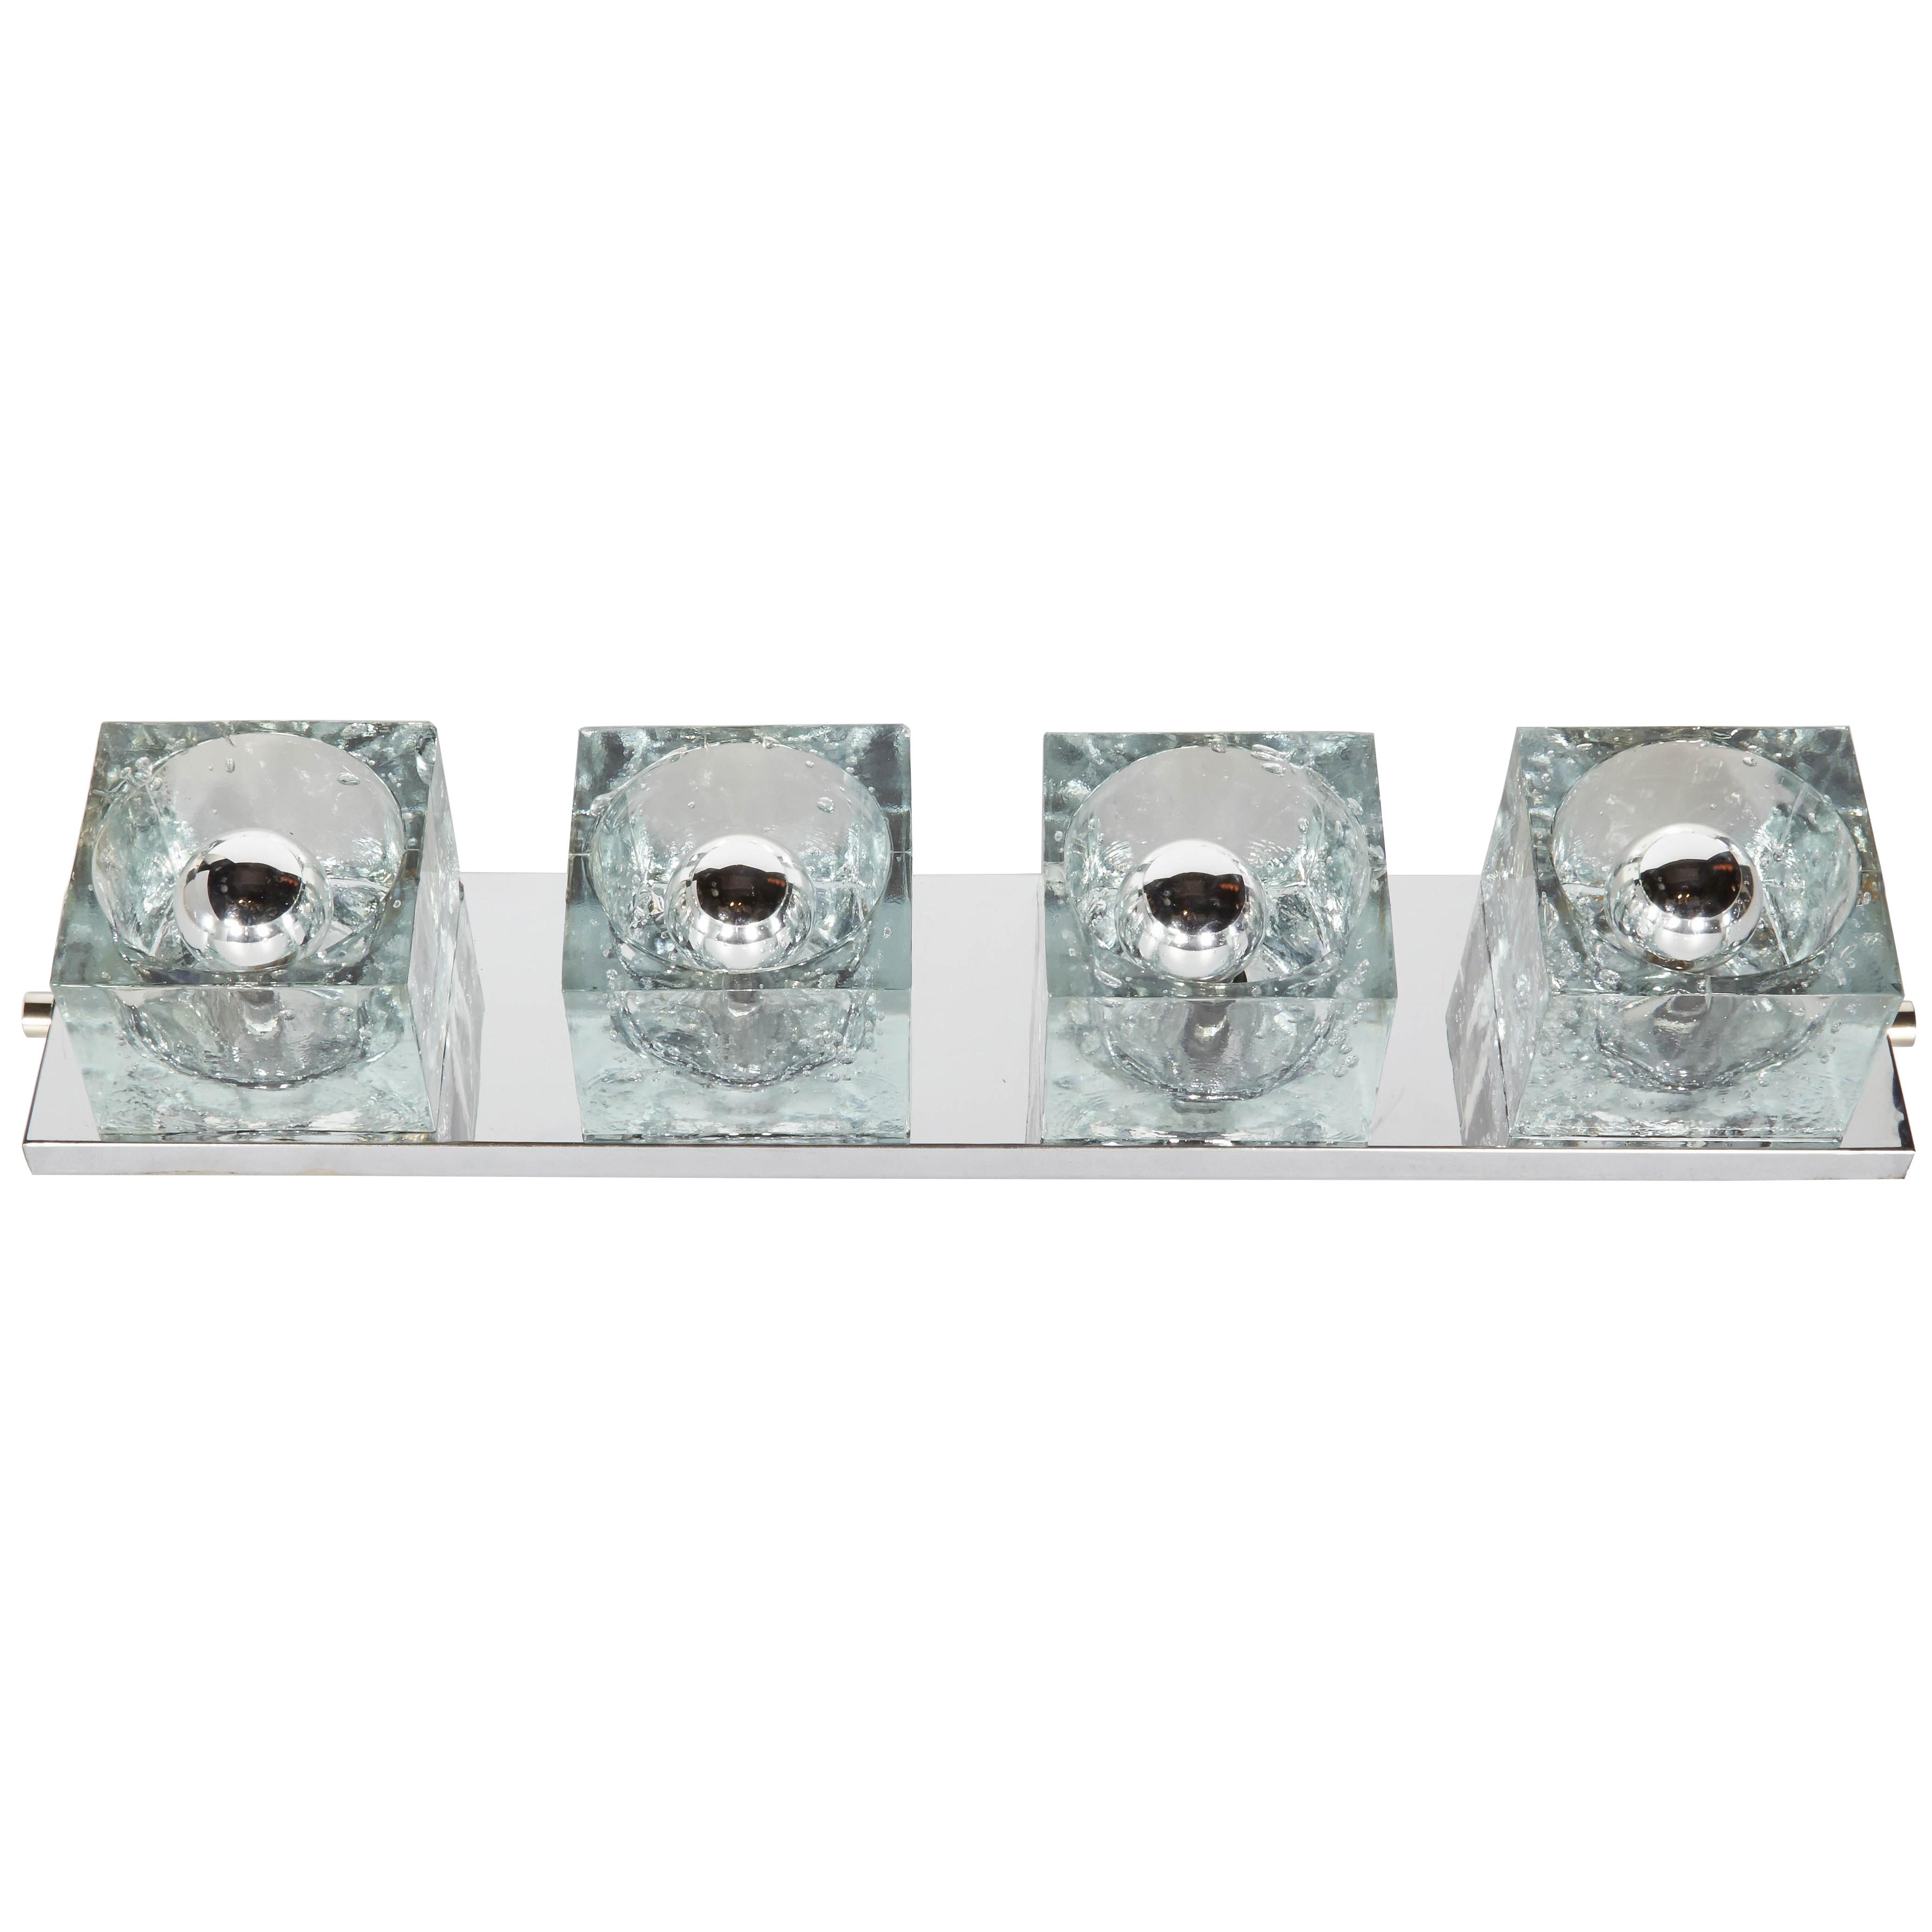 Cubist wall sconce featuring four large chunky glass block shades. Streamline polished chrome frame with cube glass design. Can be mounted vertically or horizontally.  Shown with chrome tip bulbs. 

Minor wear on frame and some glass components have